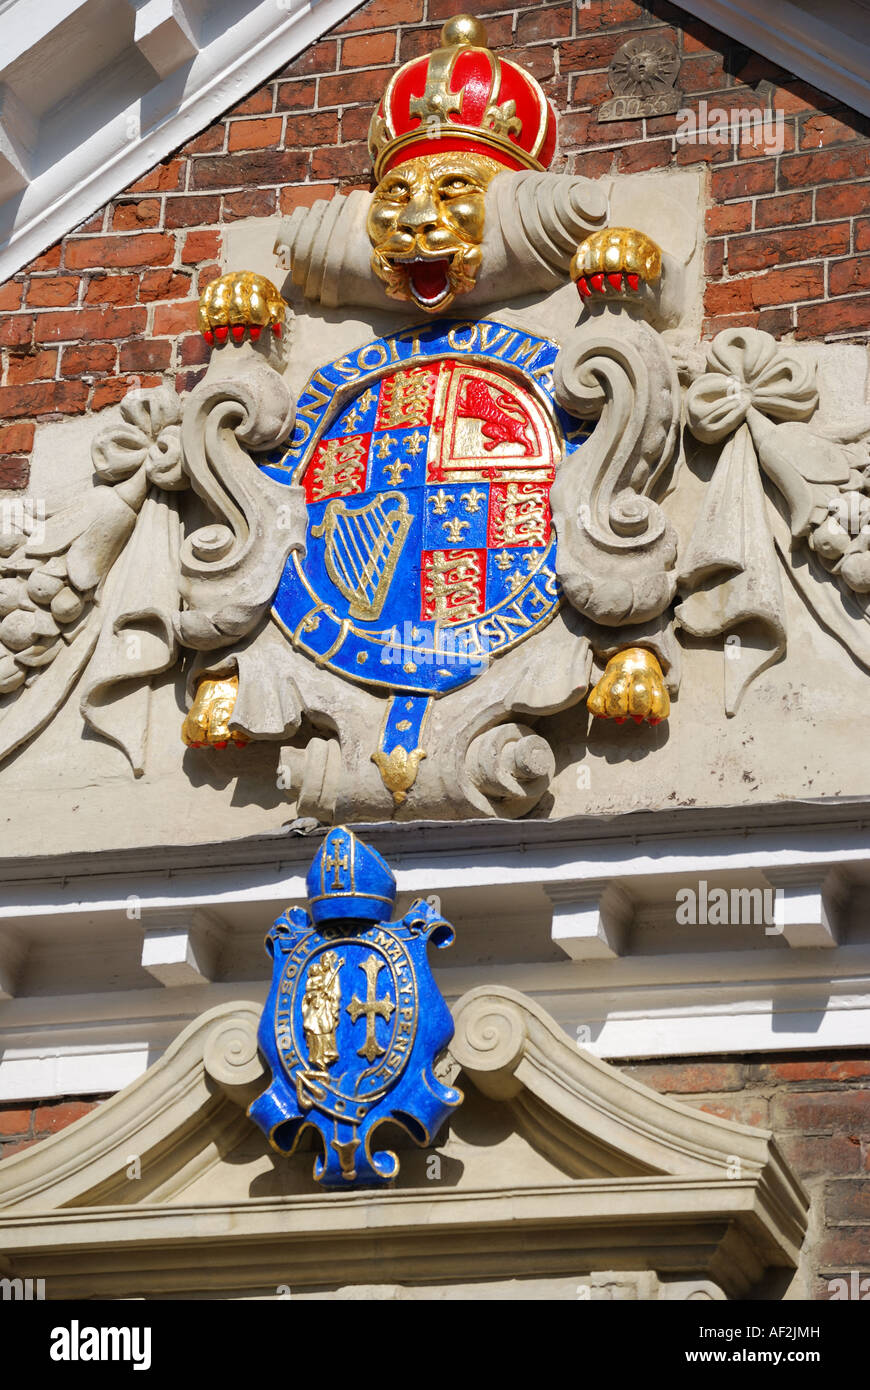 Decorative gable and coat of arms, Winchester, Hampshire, England, United Kingdom Stock Photo